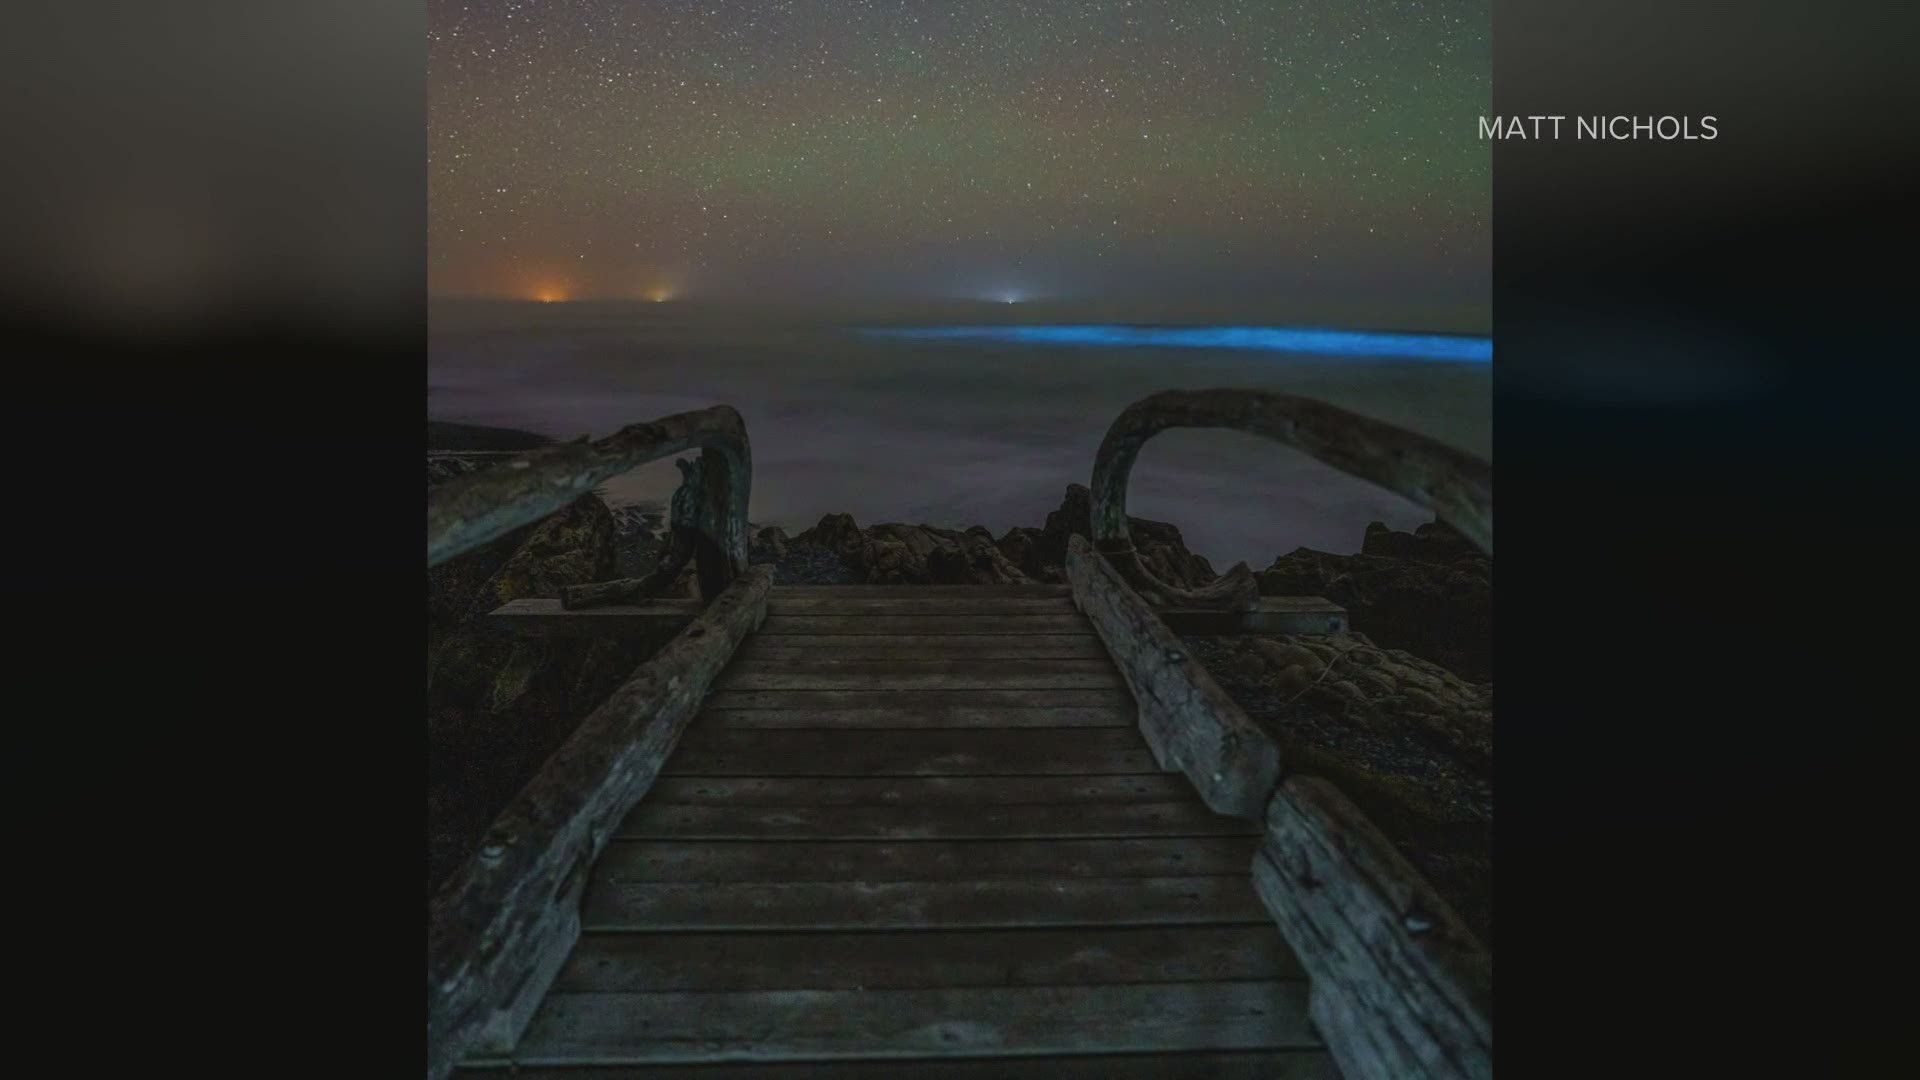 Bioluminescent plankton are causing a beautiful blue glow in waves on the Washington coast that can best be seen after clear, warm days and on darkest nights.